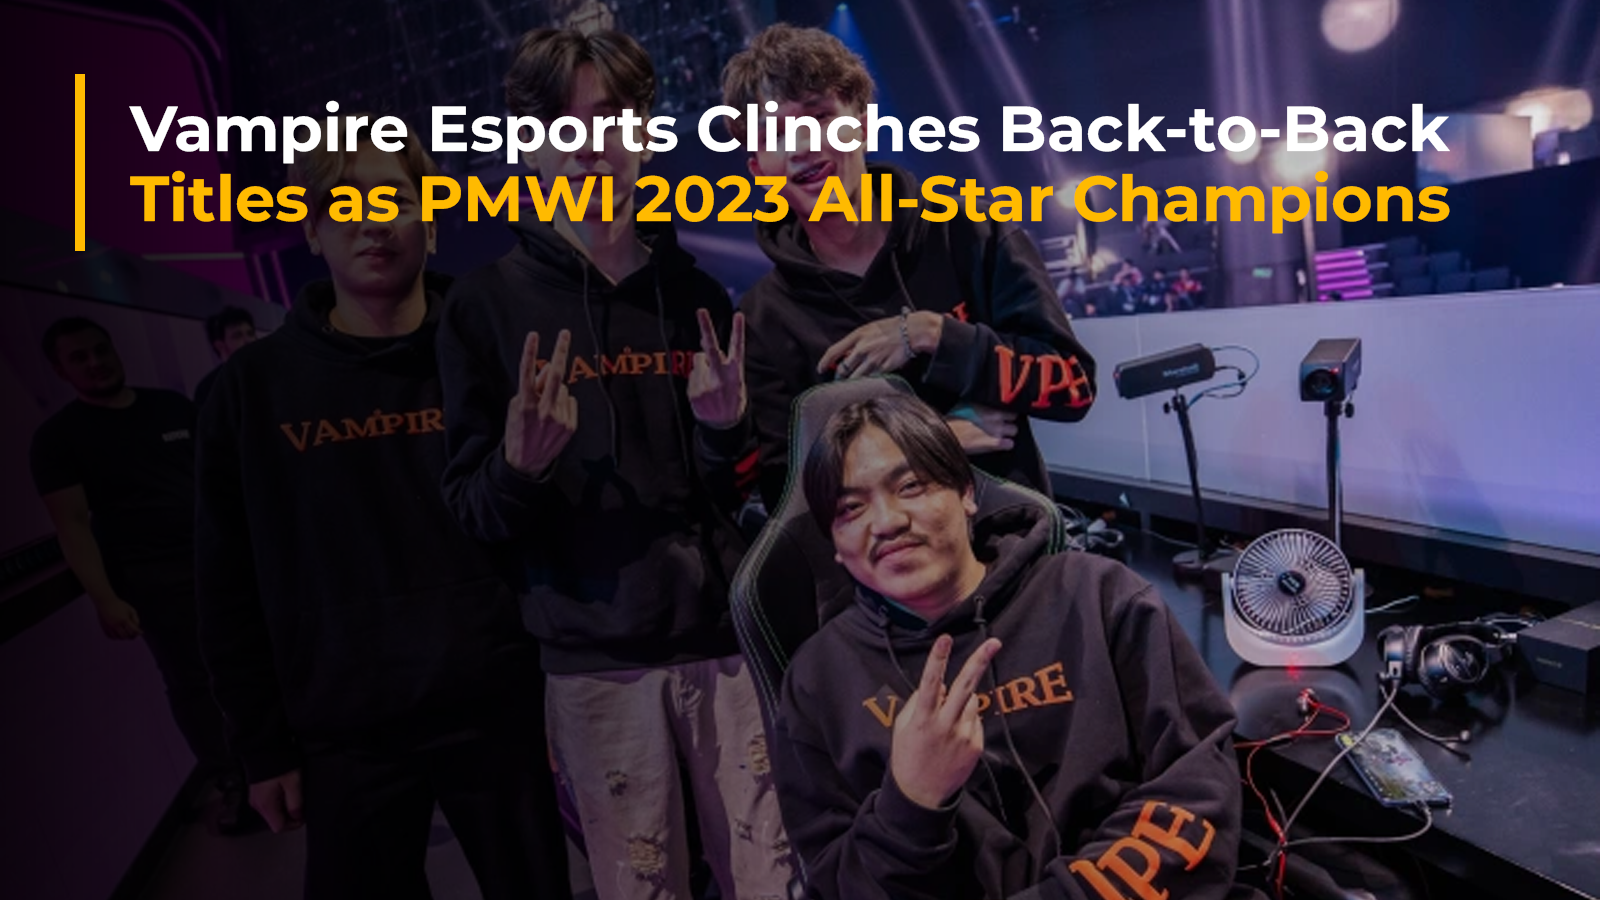 Vampire Esports Clinches Back-to-Back Titles as PMWI 2023 All-Star Champions